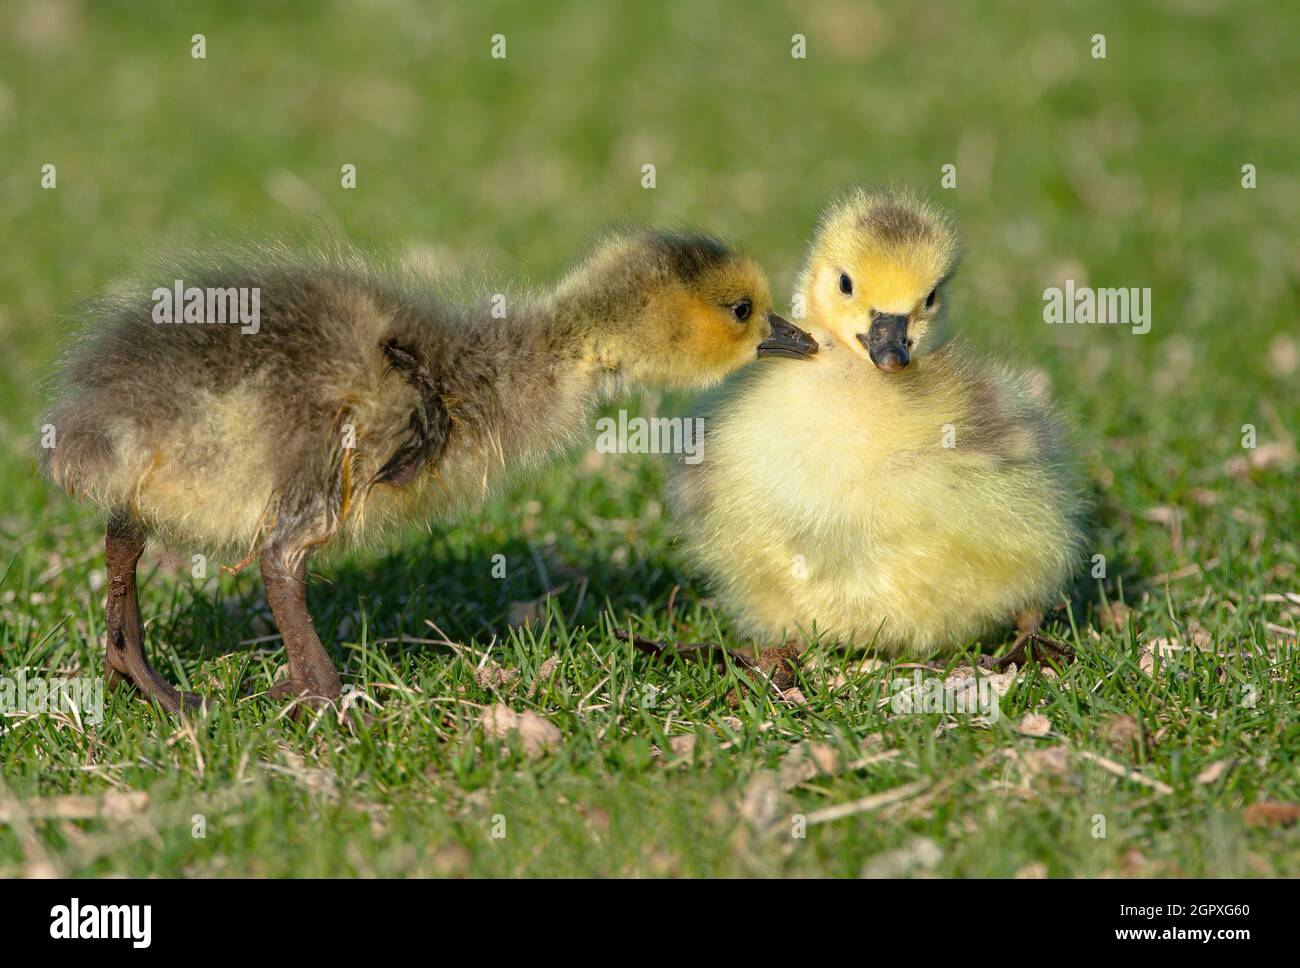 A baby Goose gets a mouthful of downy feathers as it nips on its sibling. Stock Photo